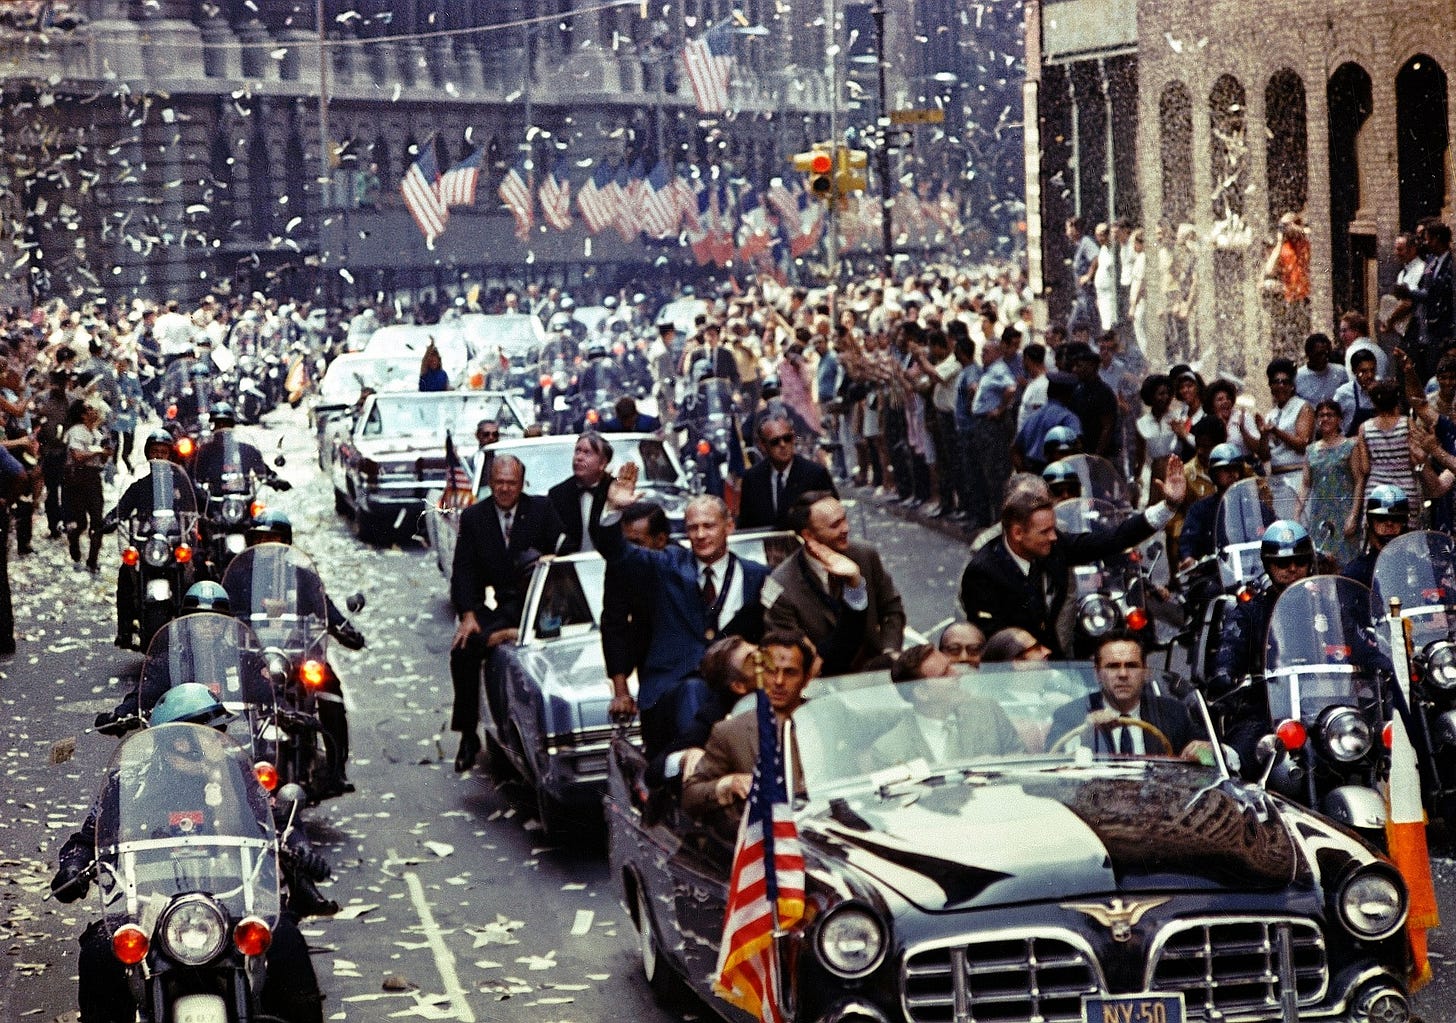 Neil Armstrong waving from a convertible in a confetti-strewn ticker tape parade proceeding down a New York City street.